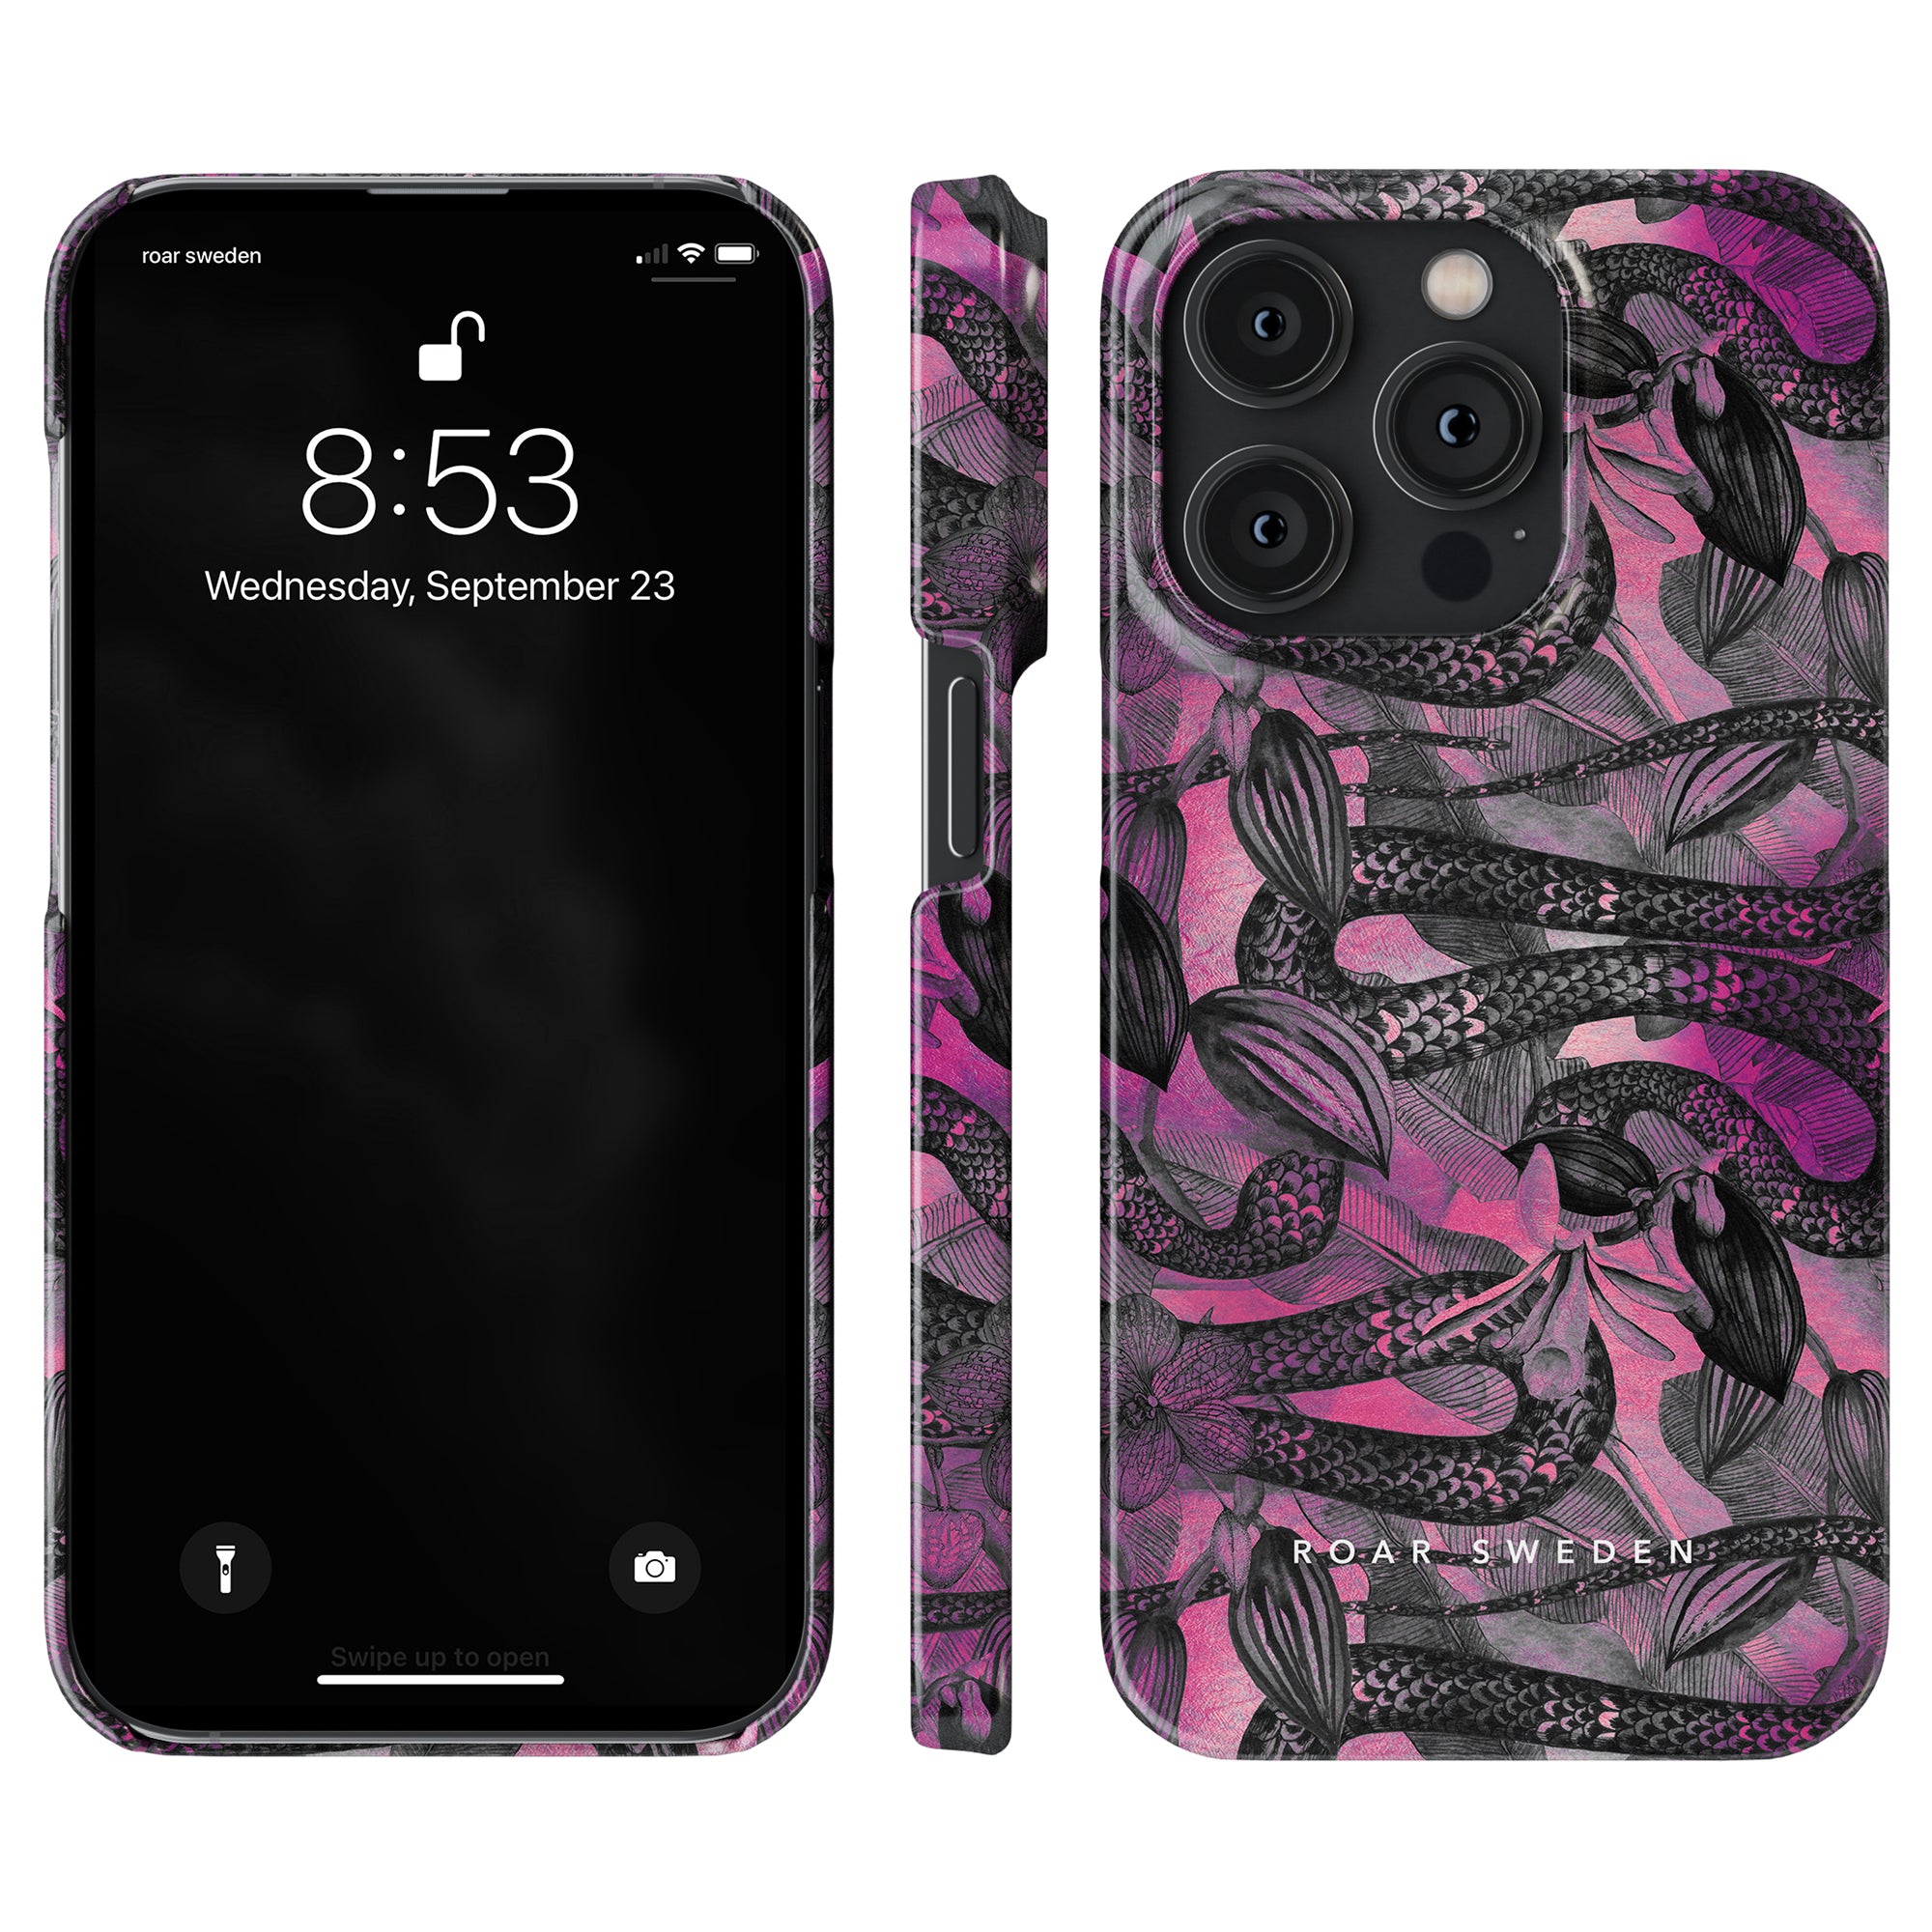 A pink and black Snake Nest - Slim case with a vibrant mermaid pattern.